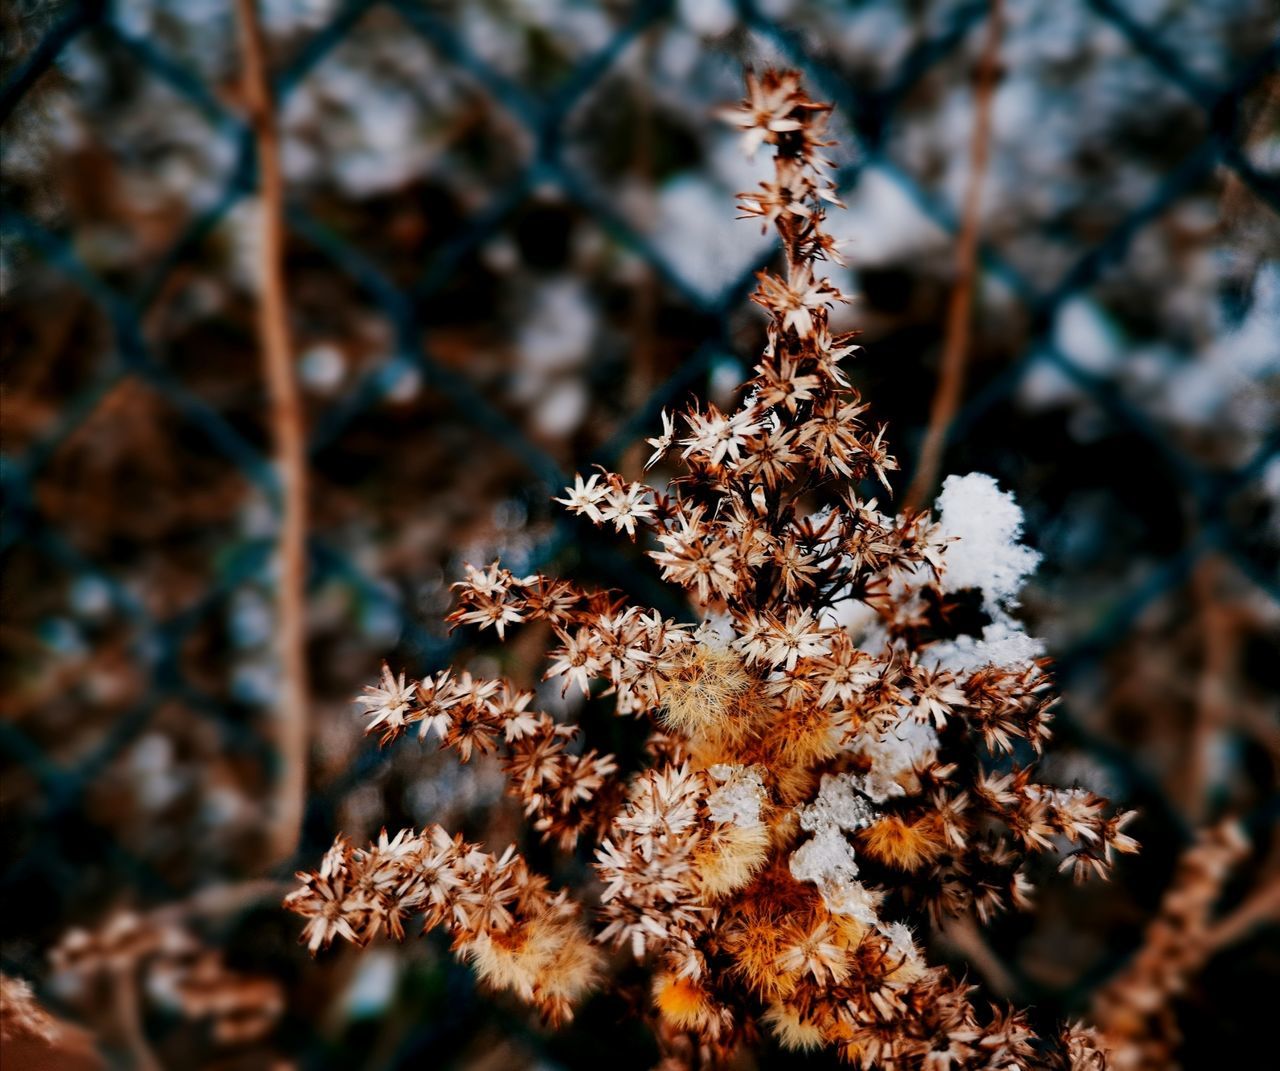 plant, beauty in nature, growth, no people, close-up, nature, day, selective focus, fragility, focus on foreground, vulnerability, tree, outdoors, flowering plant, flower, branch, cold temperature, winter, freshness, tranquility, change, lichen